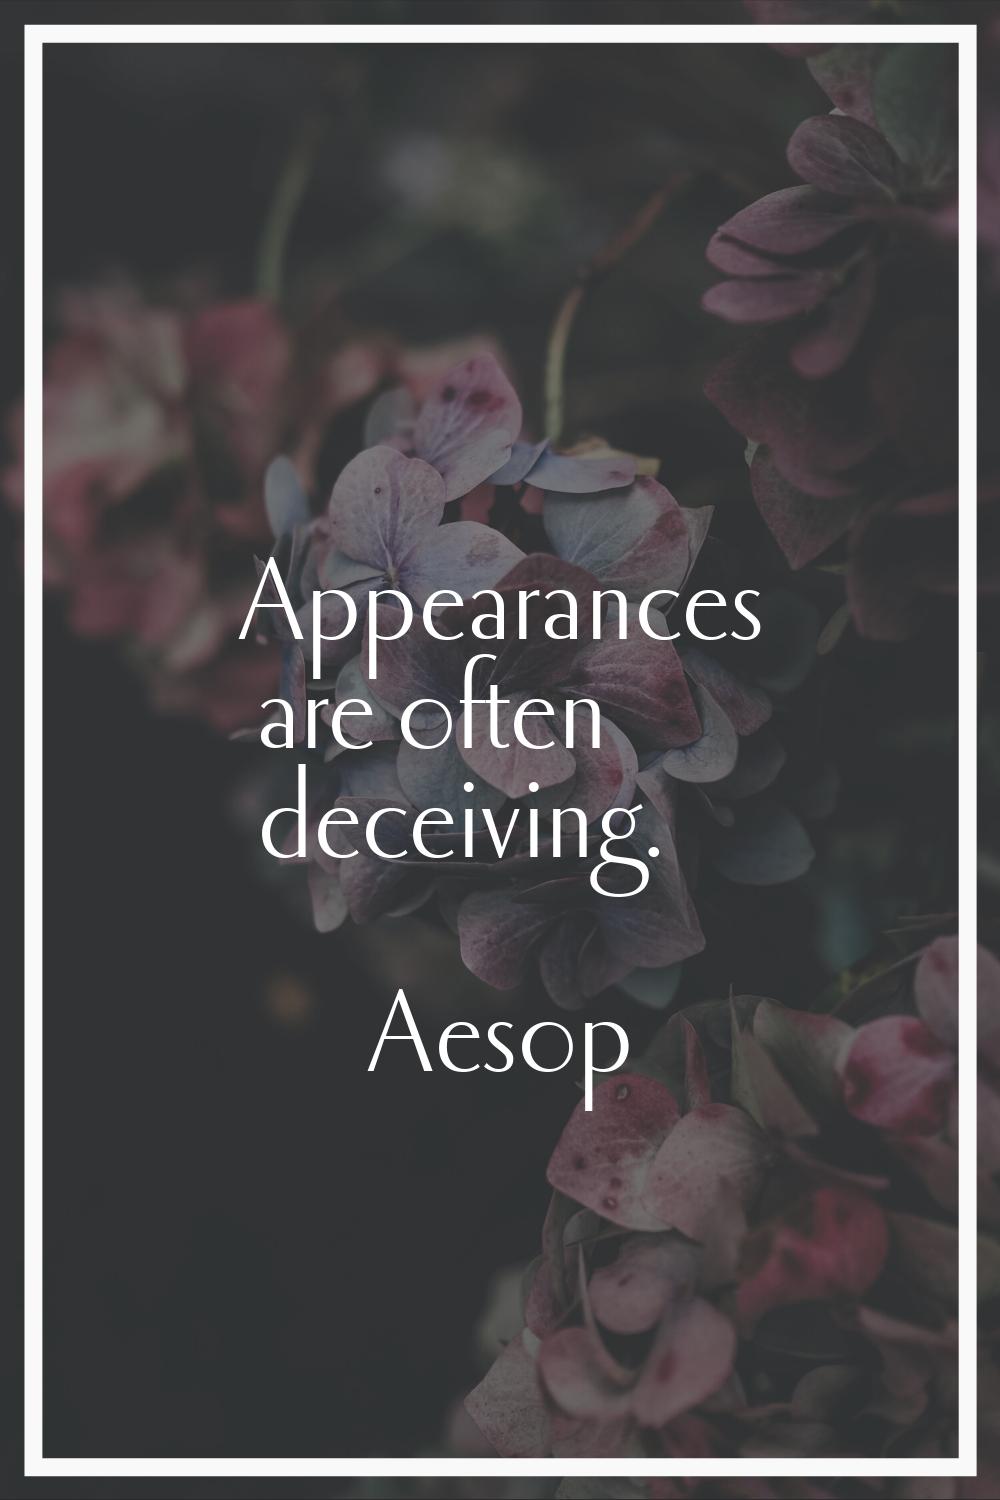 Appearances are often deceiving.